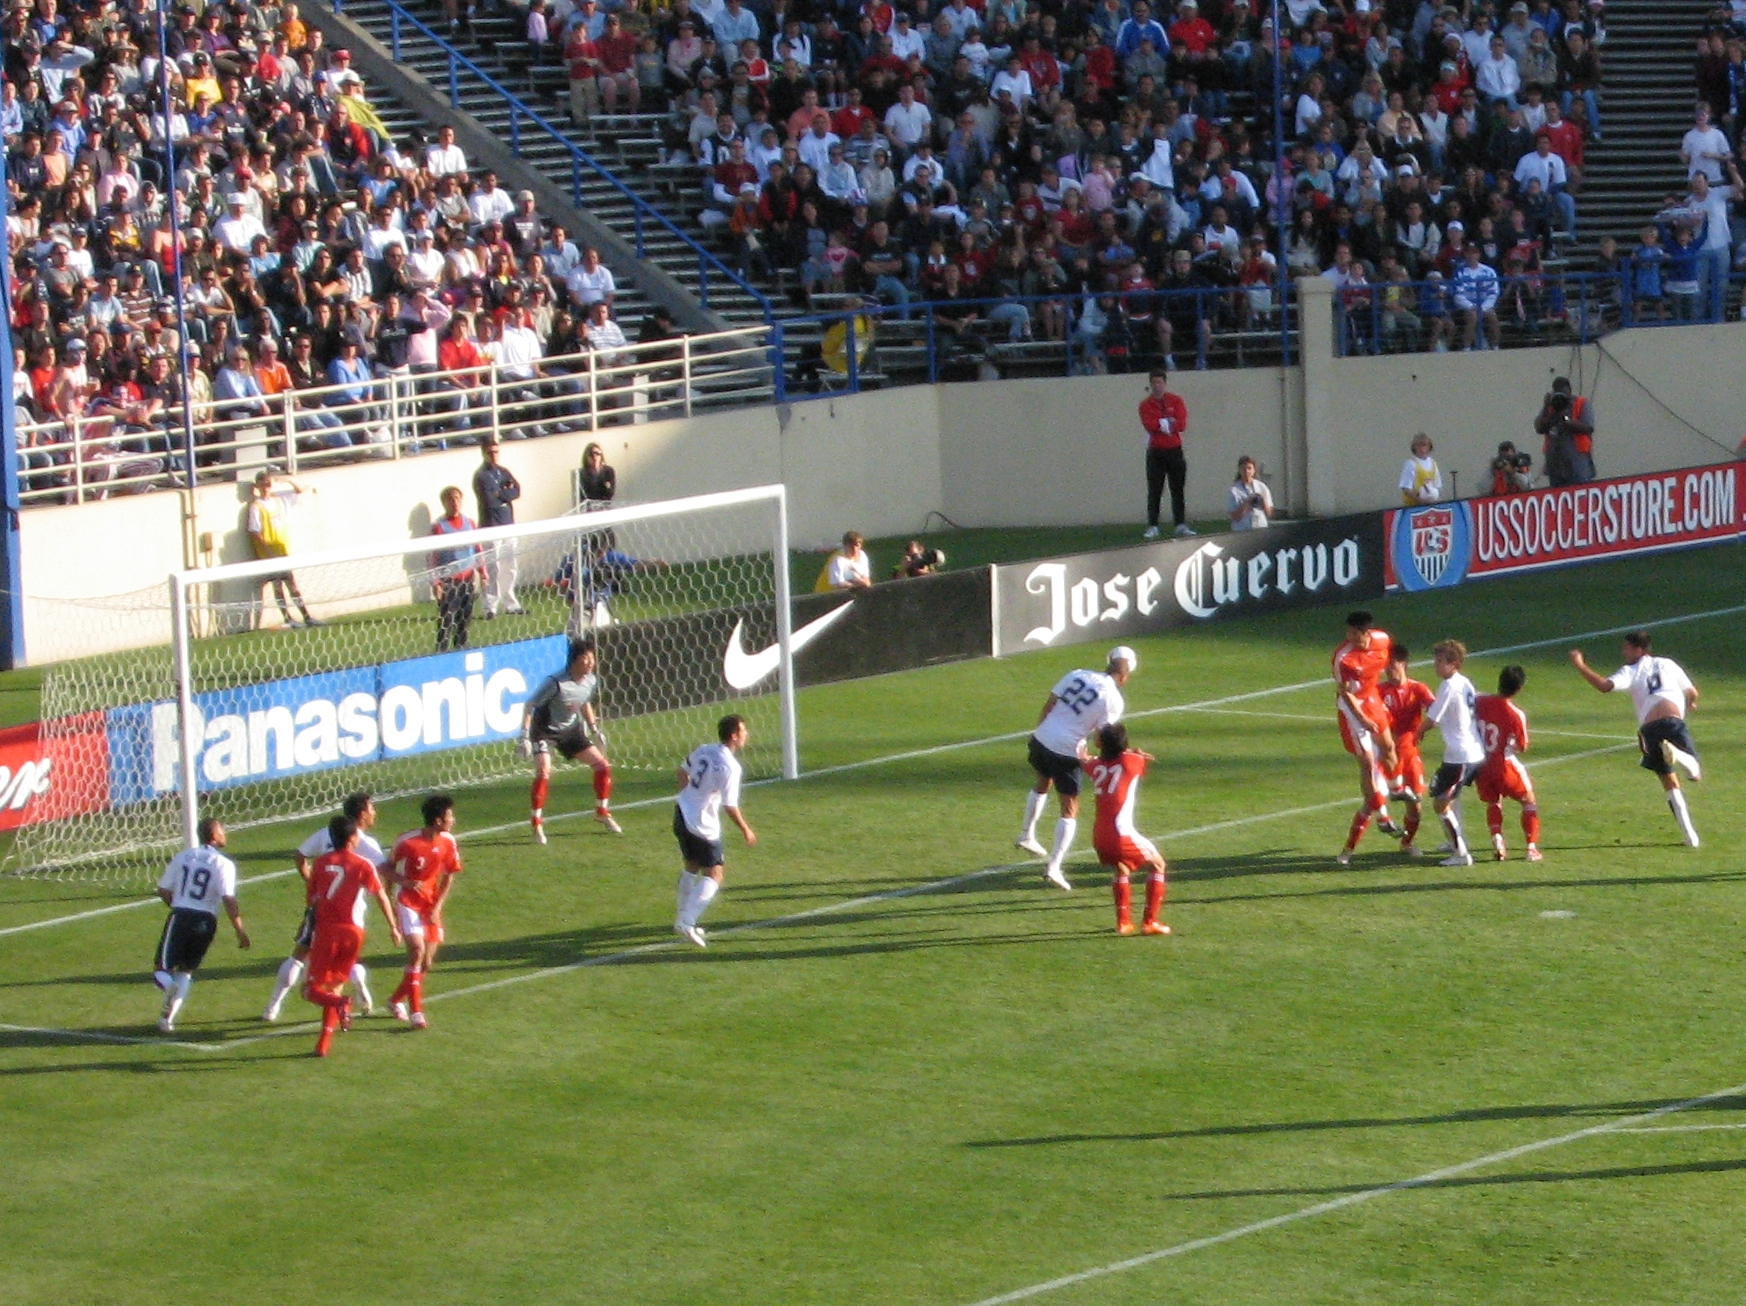 a group of people playing soccer in front of a crowd